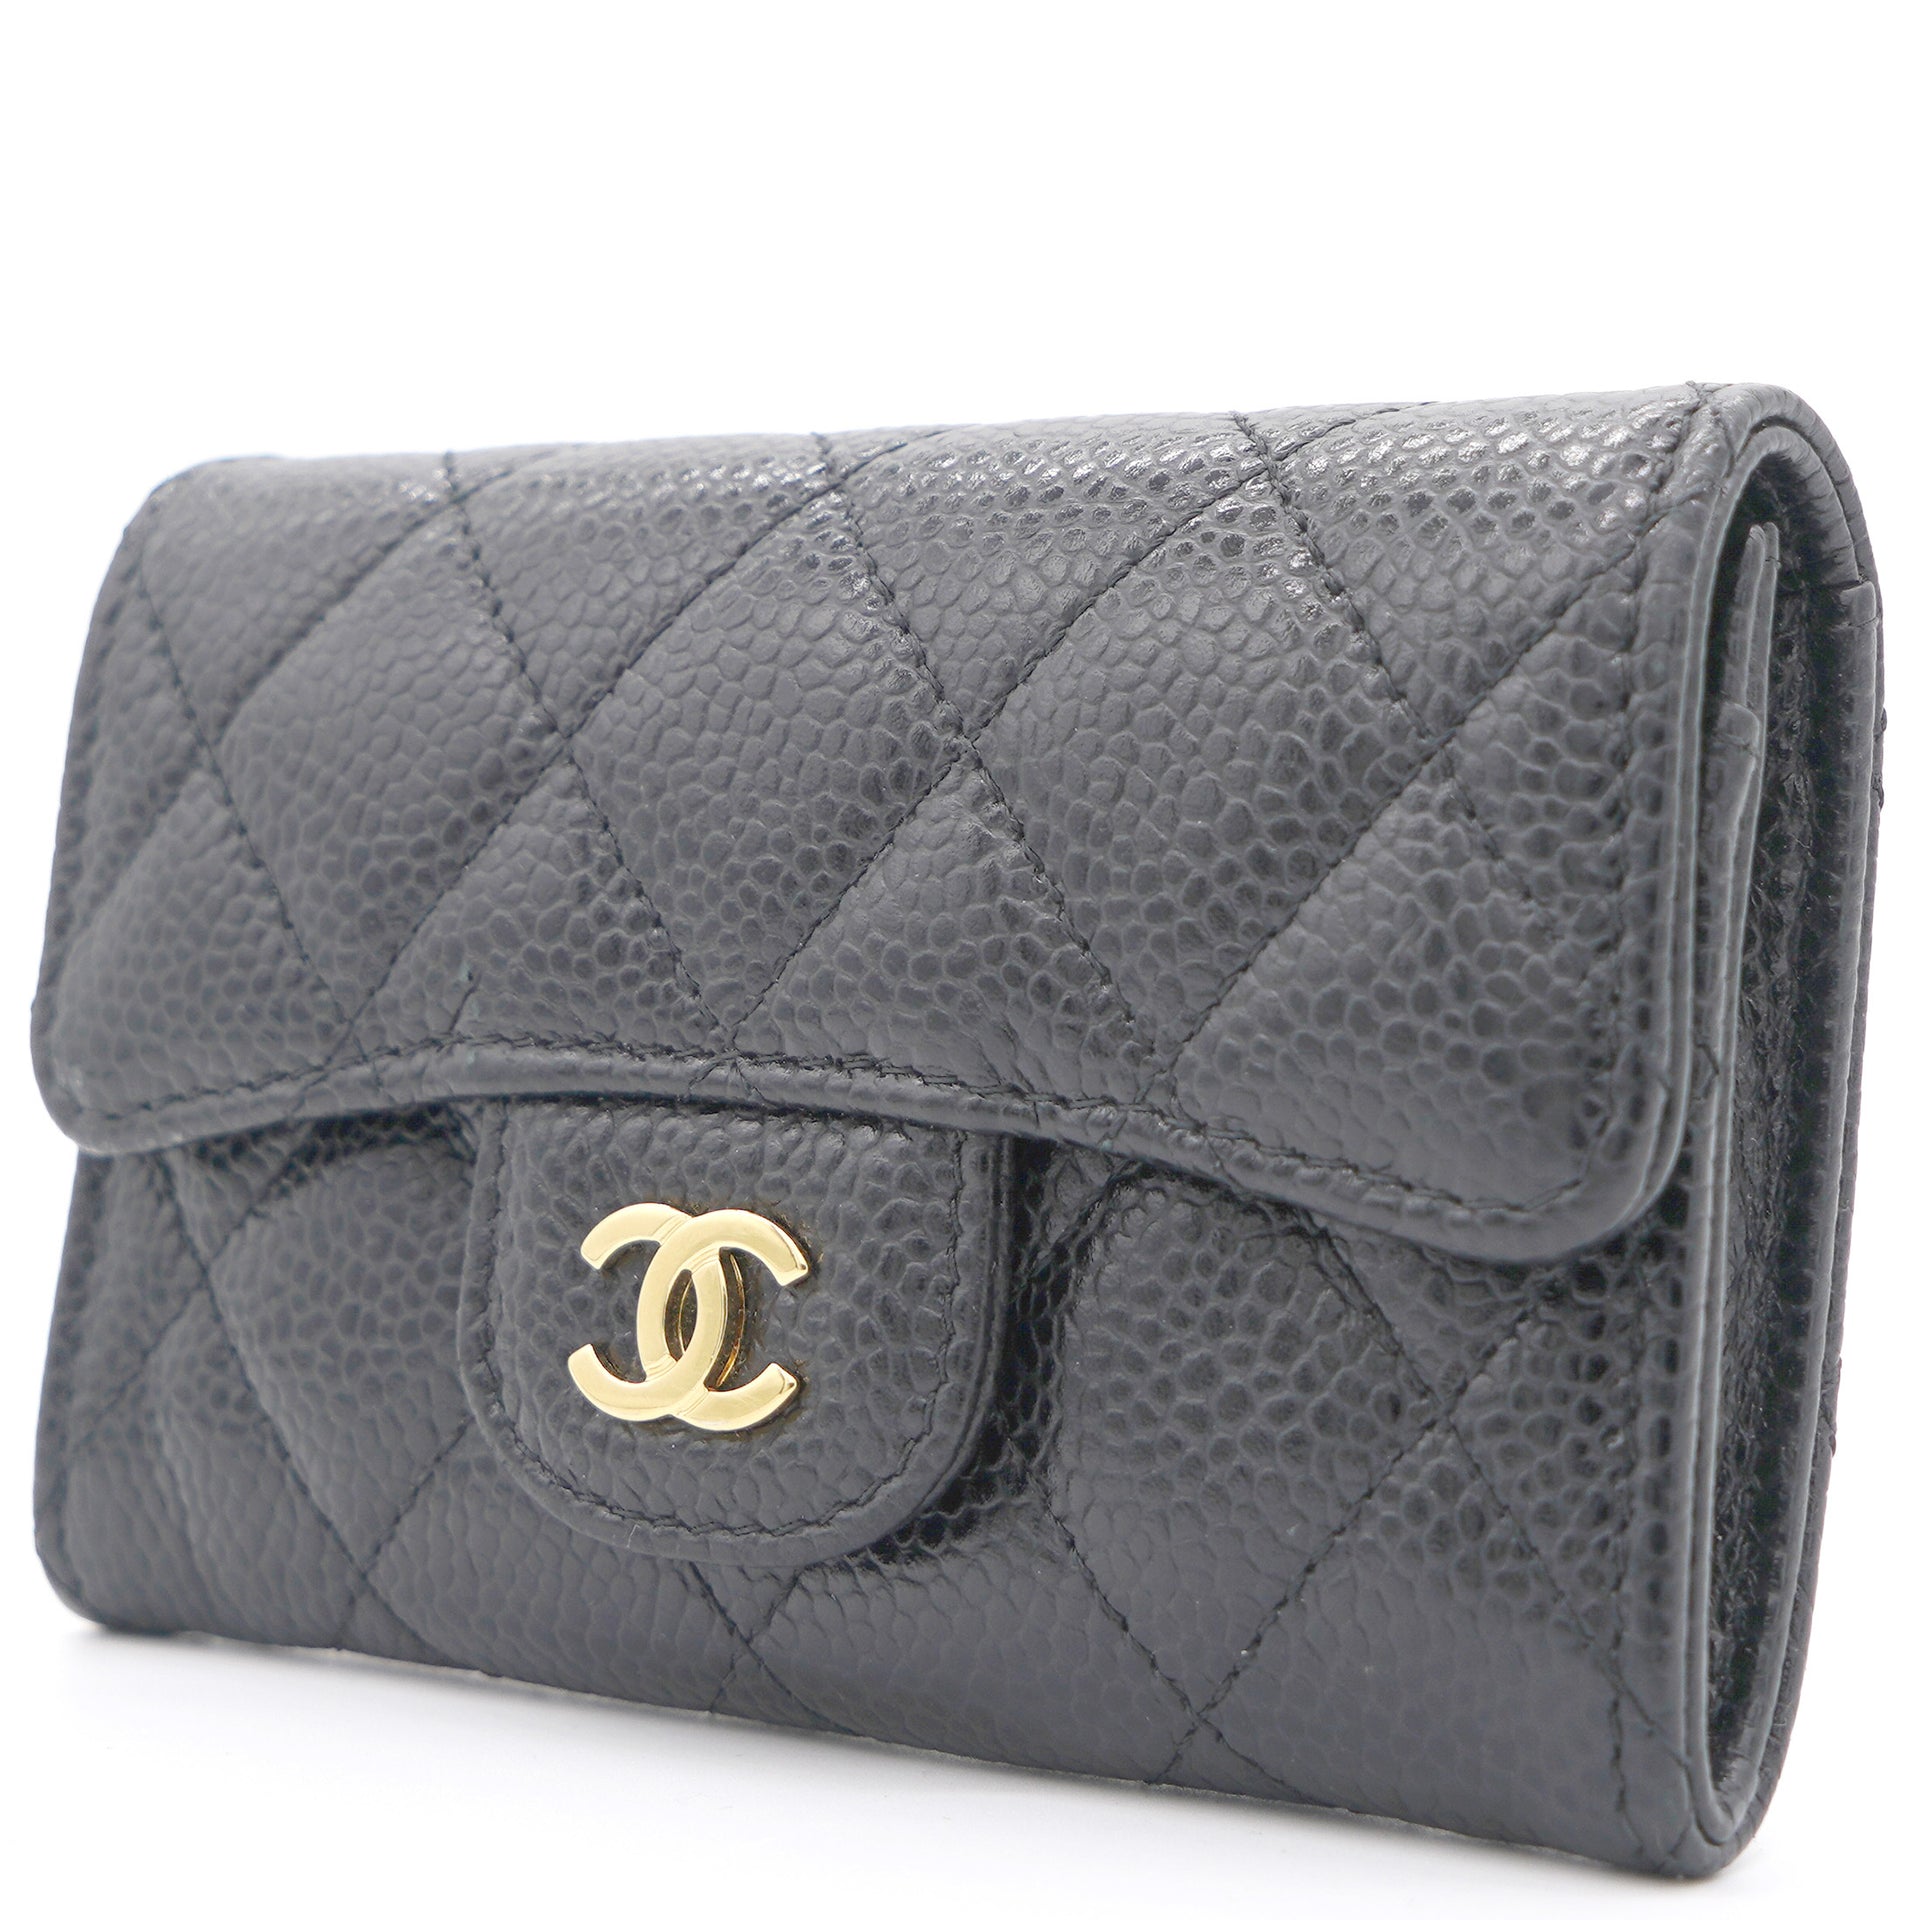 CHANEL CLASSIC LONG FLAP WALLET Caviar GHW Review  Unboxing  by BEVERLY   YouTube